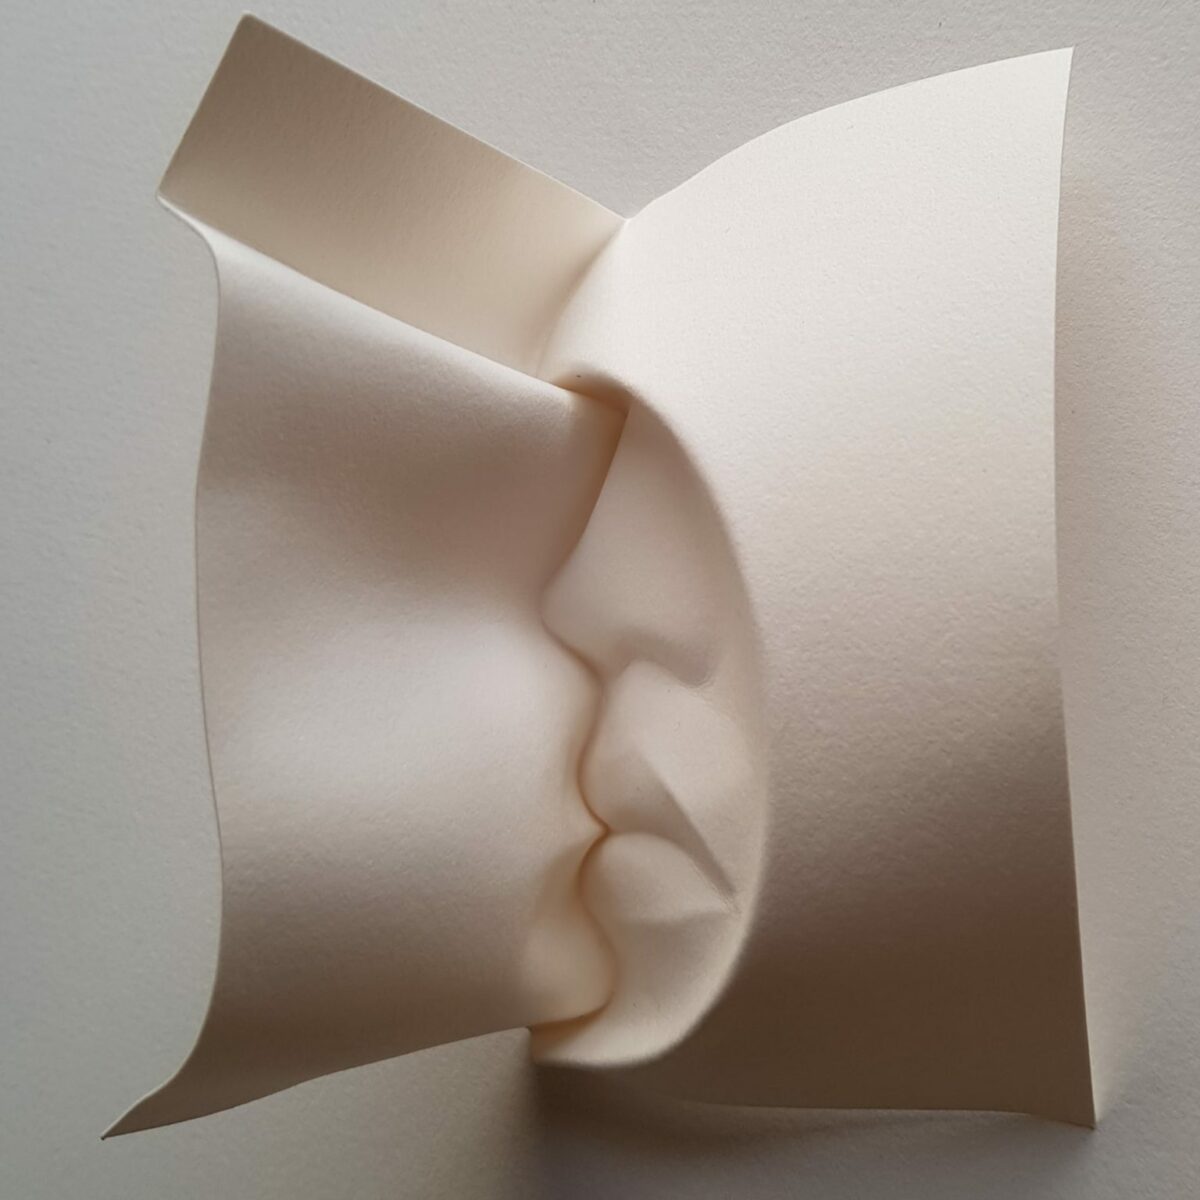 Fascinating Facial Sculptures Made From Folded Paper Sheets By Polly Verity (9)